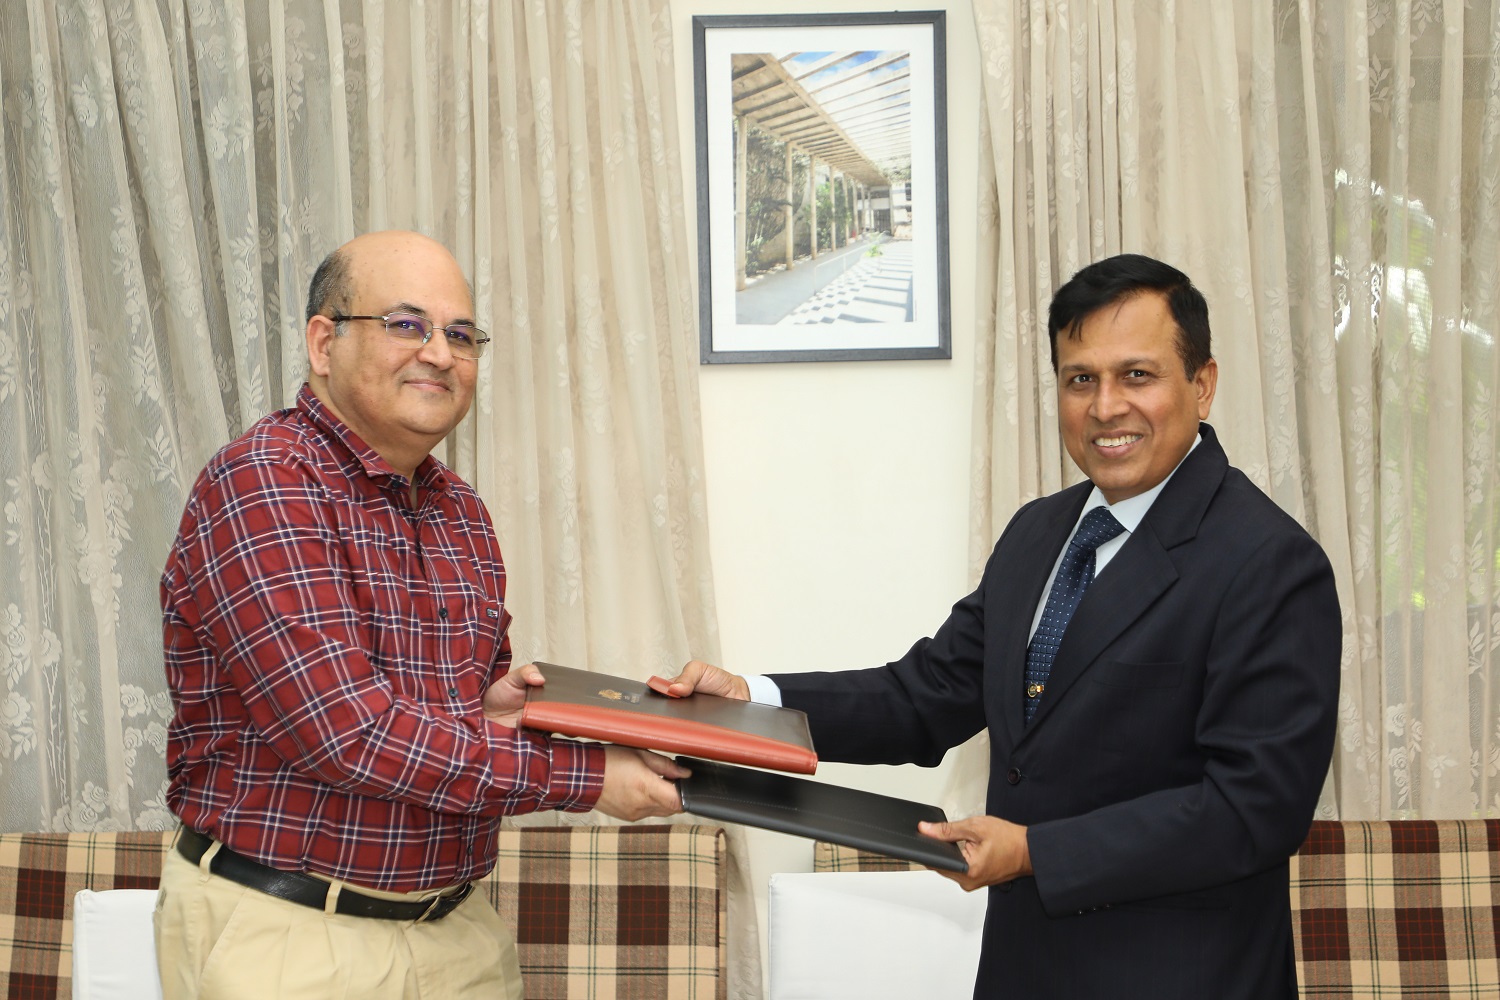 Prof. Rishikesha T Krishnan, Director, IIMB, and Sanjay Dwivedi, Director of Operations, Armoured Vehicles Nigam Limited, during the signing of an MoU between IIMB and AVNL.